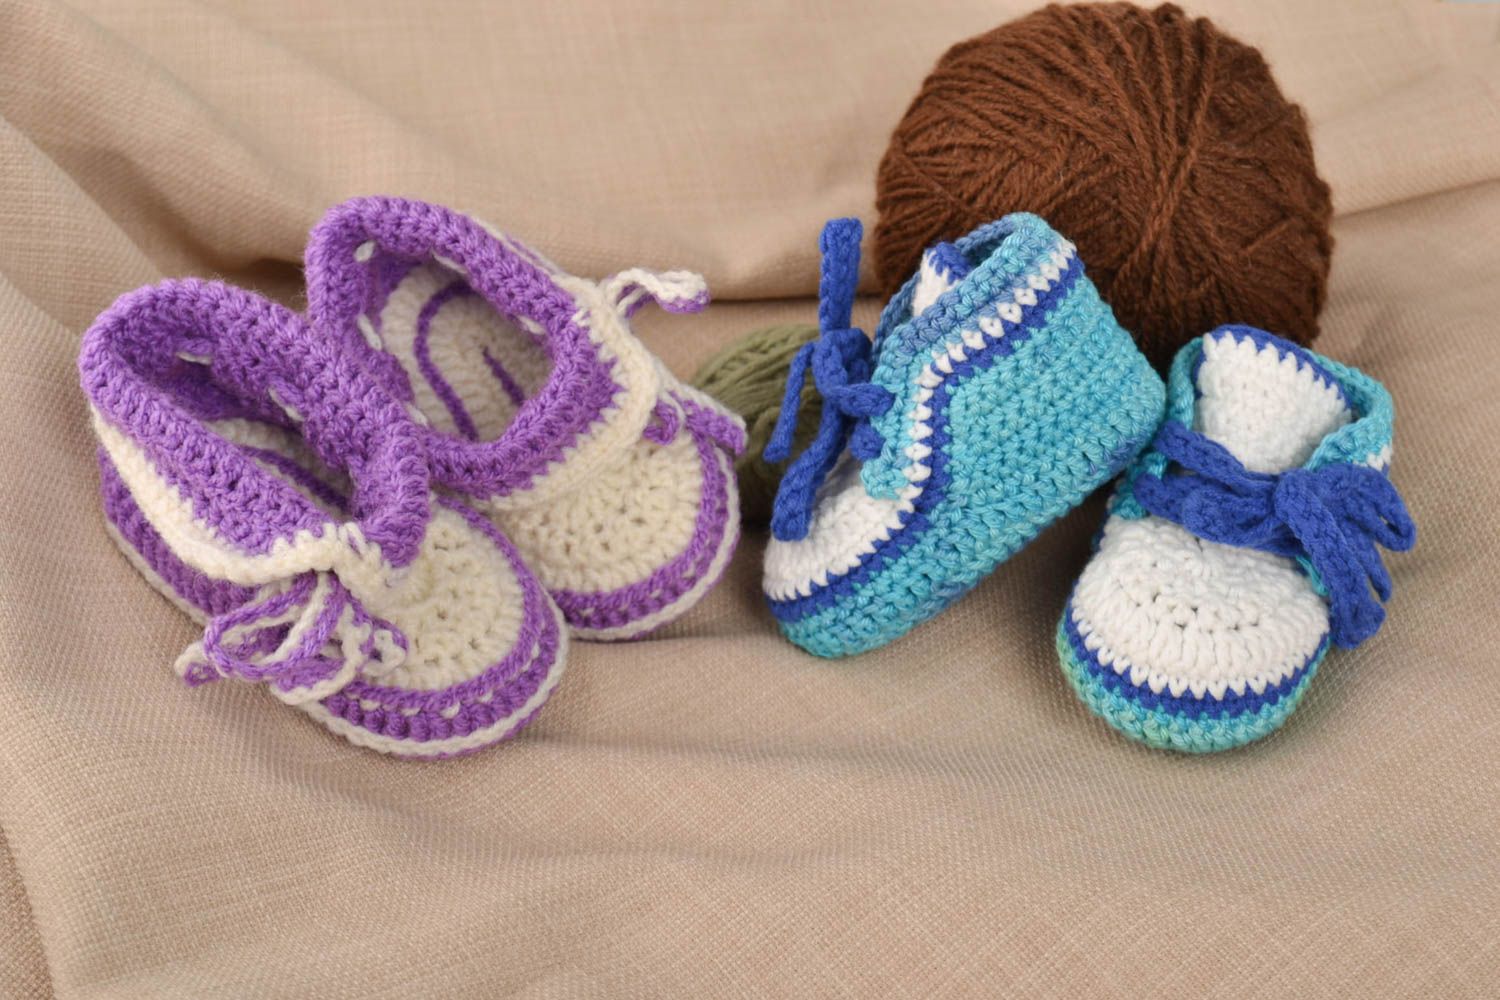 Unusual handmade baby bootees warm baby bootees fashion accessories for kids photo 1